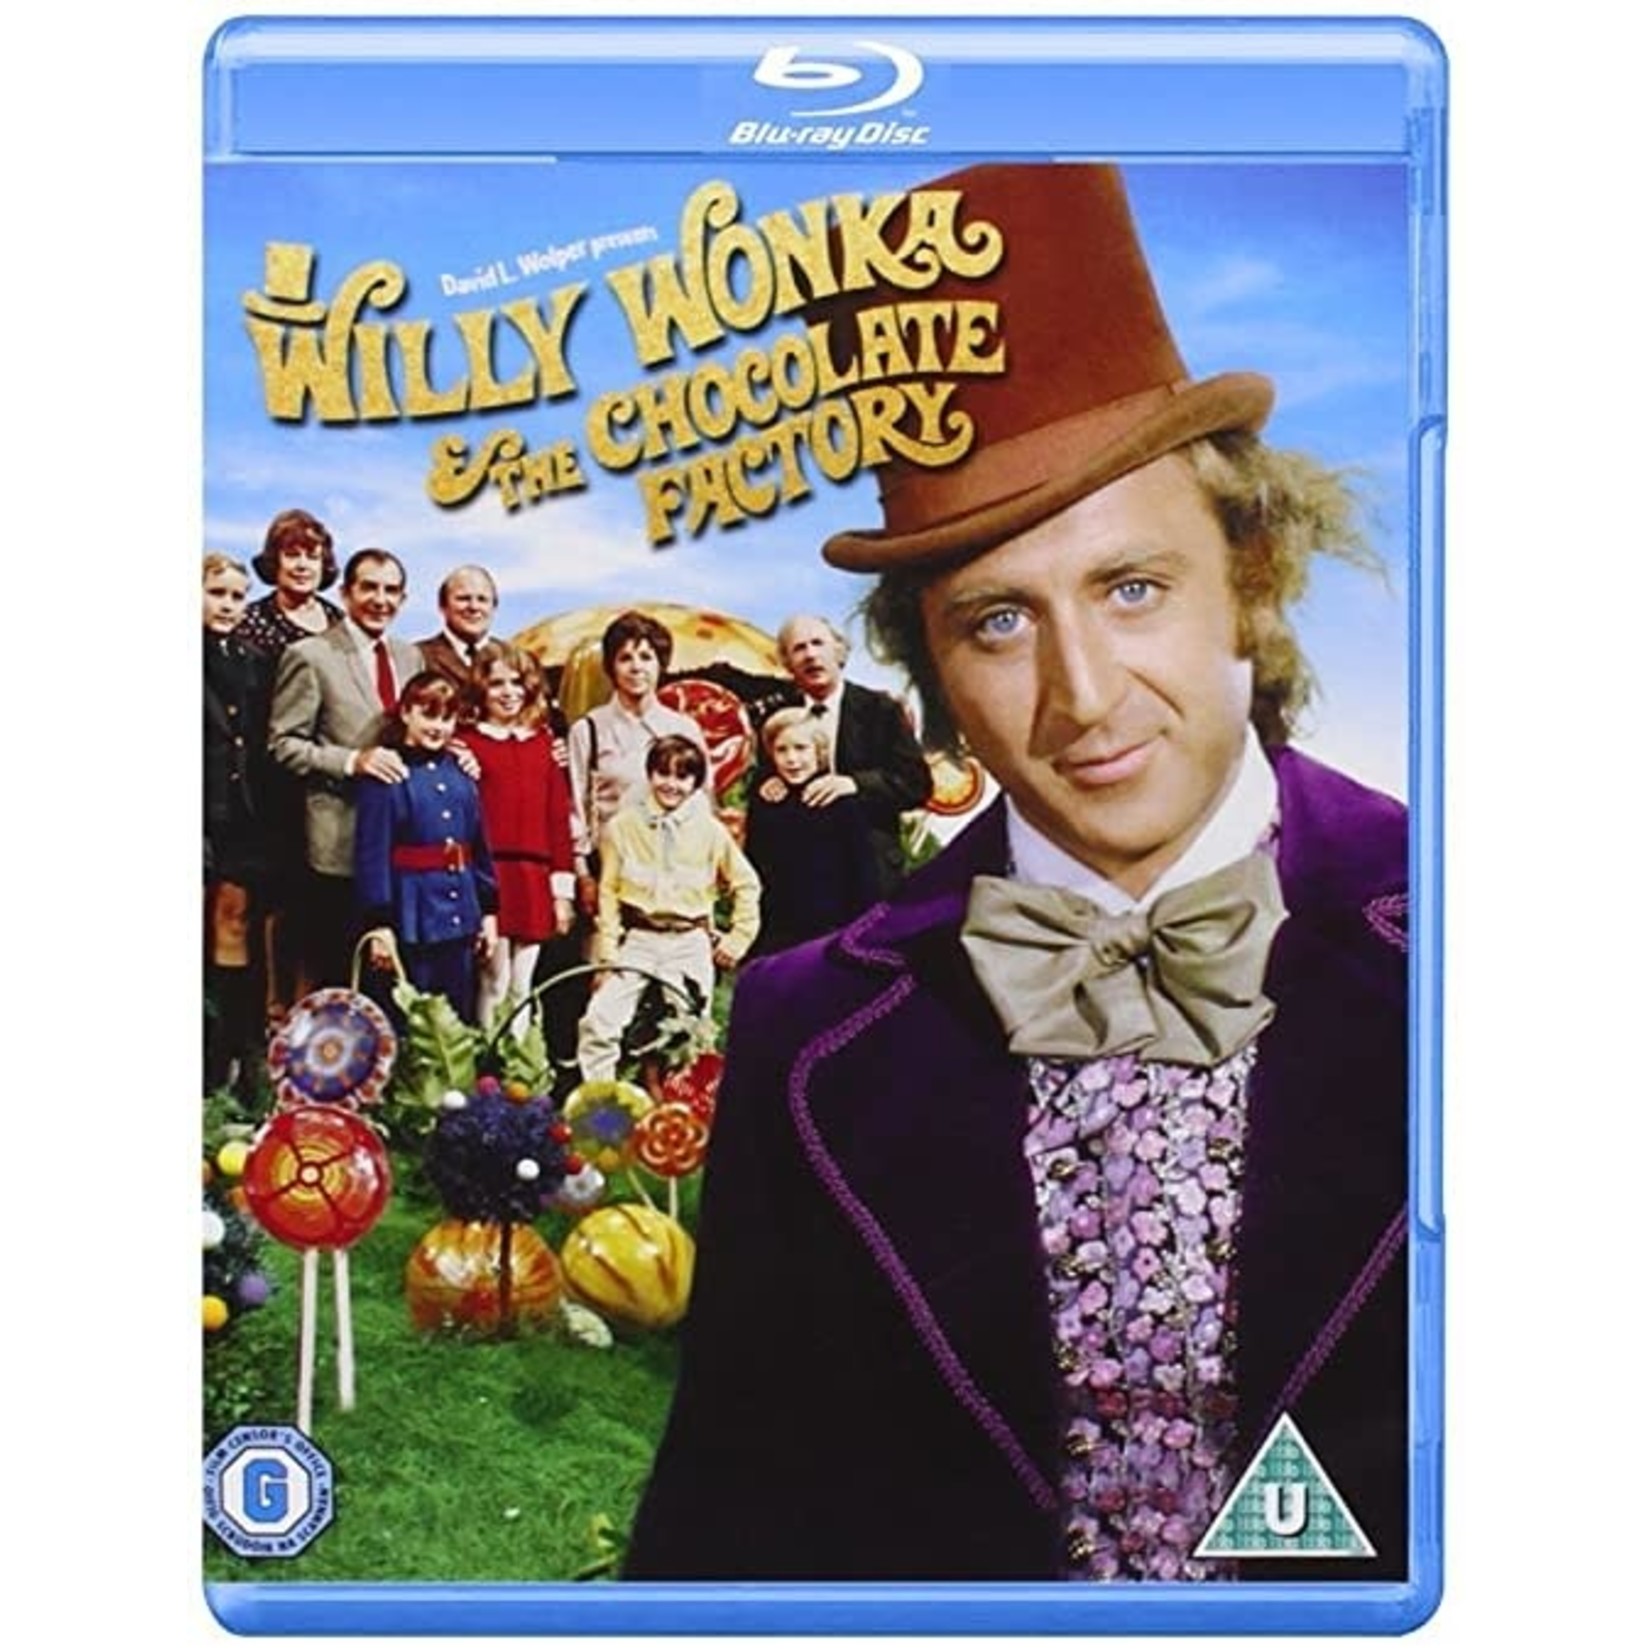 Willy Wonka & Chocolate Factory (BD)